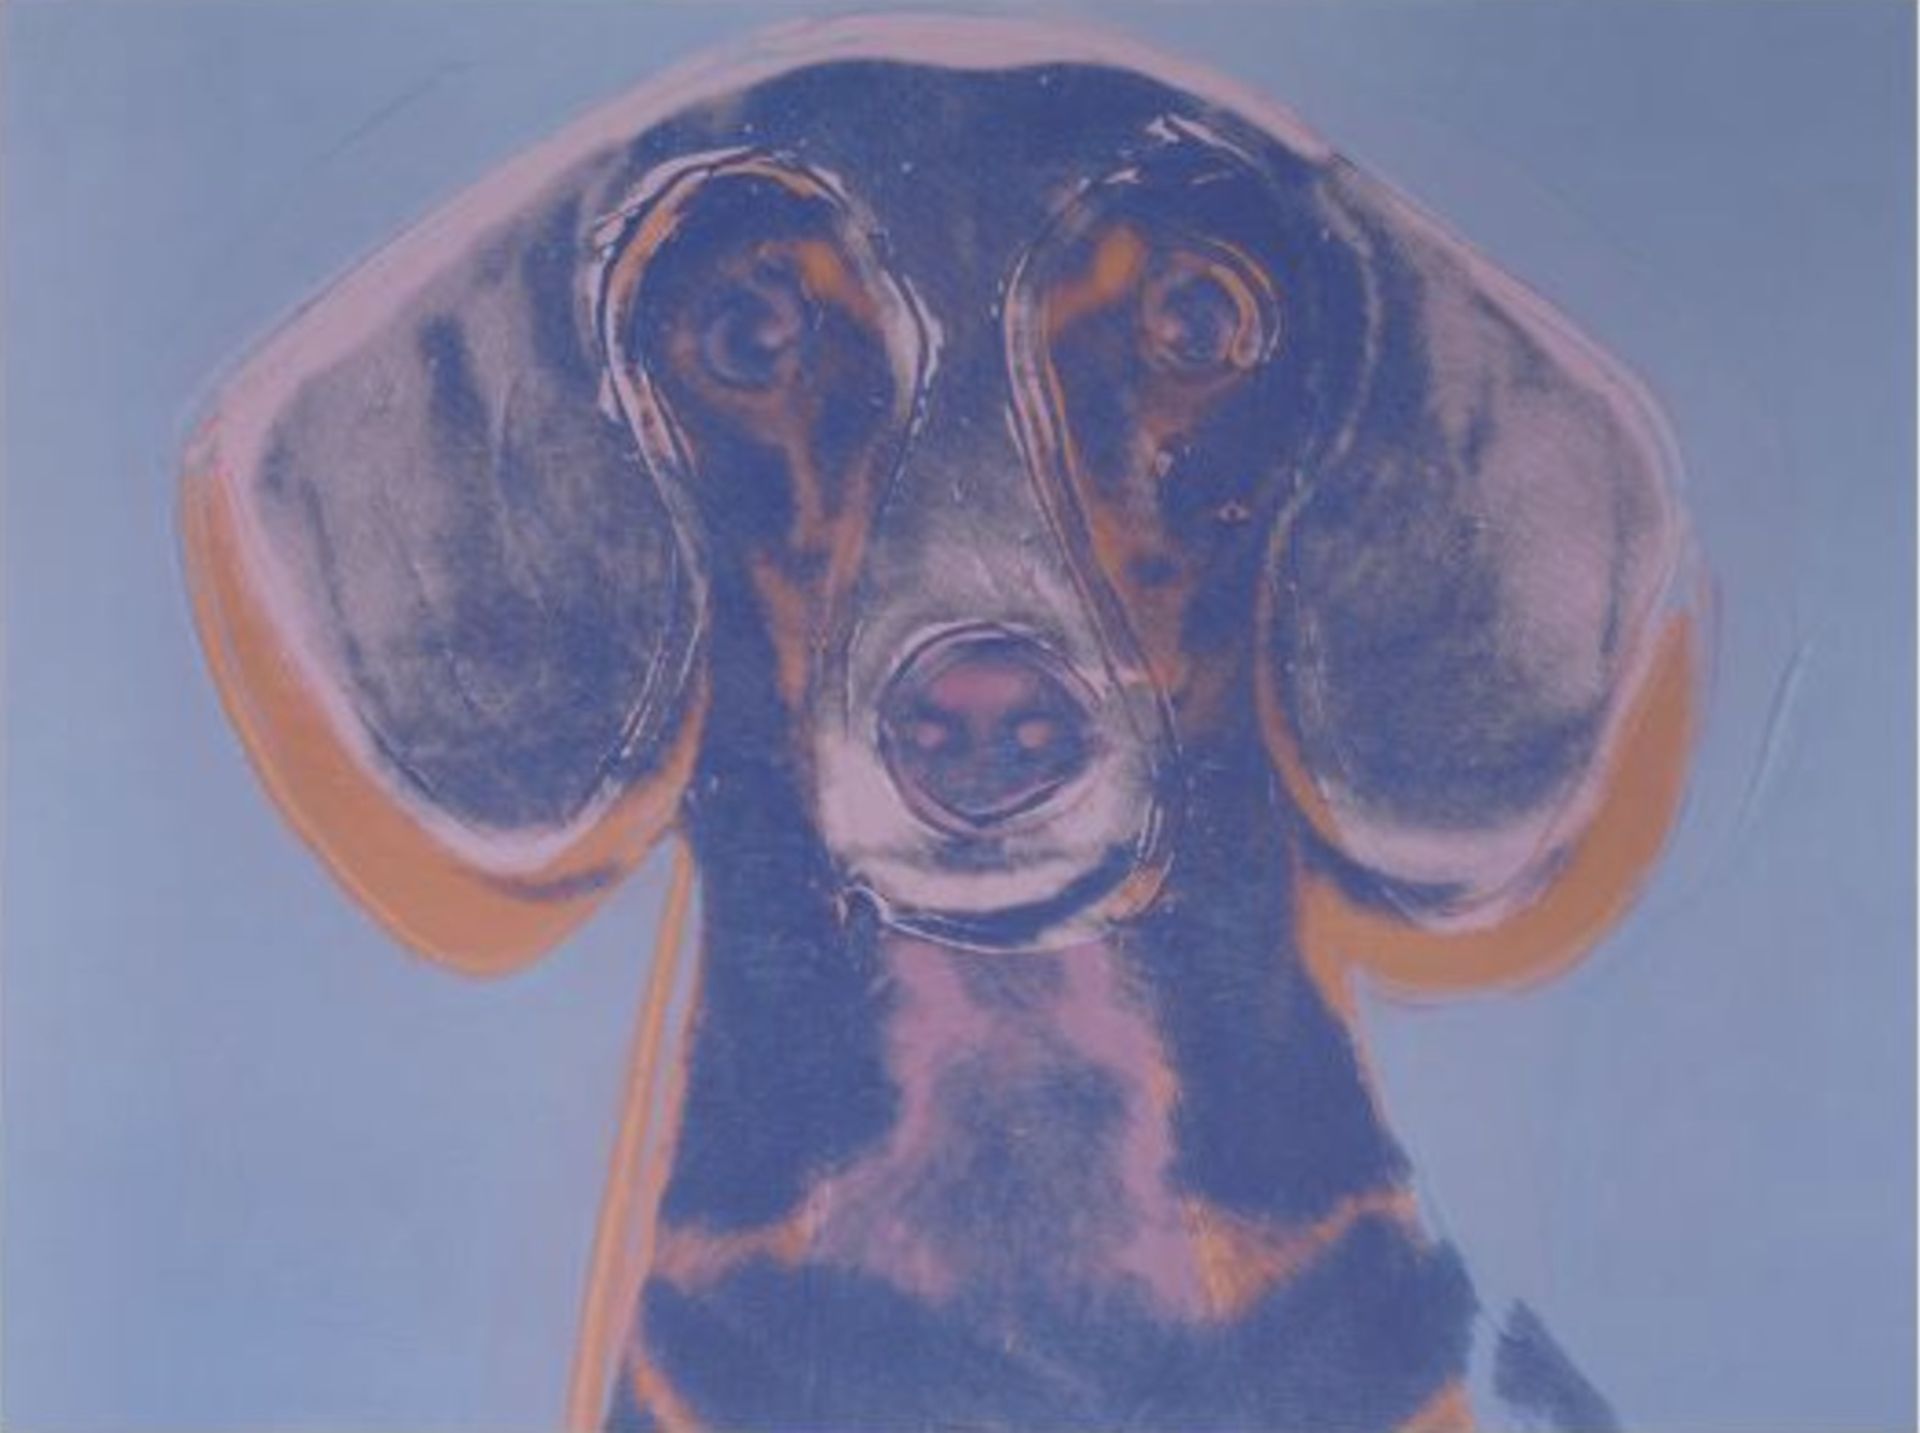 Andy Warhol "Maurice, 1976" Offset Lithograph